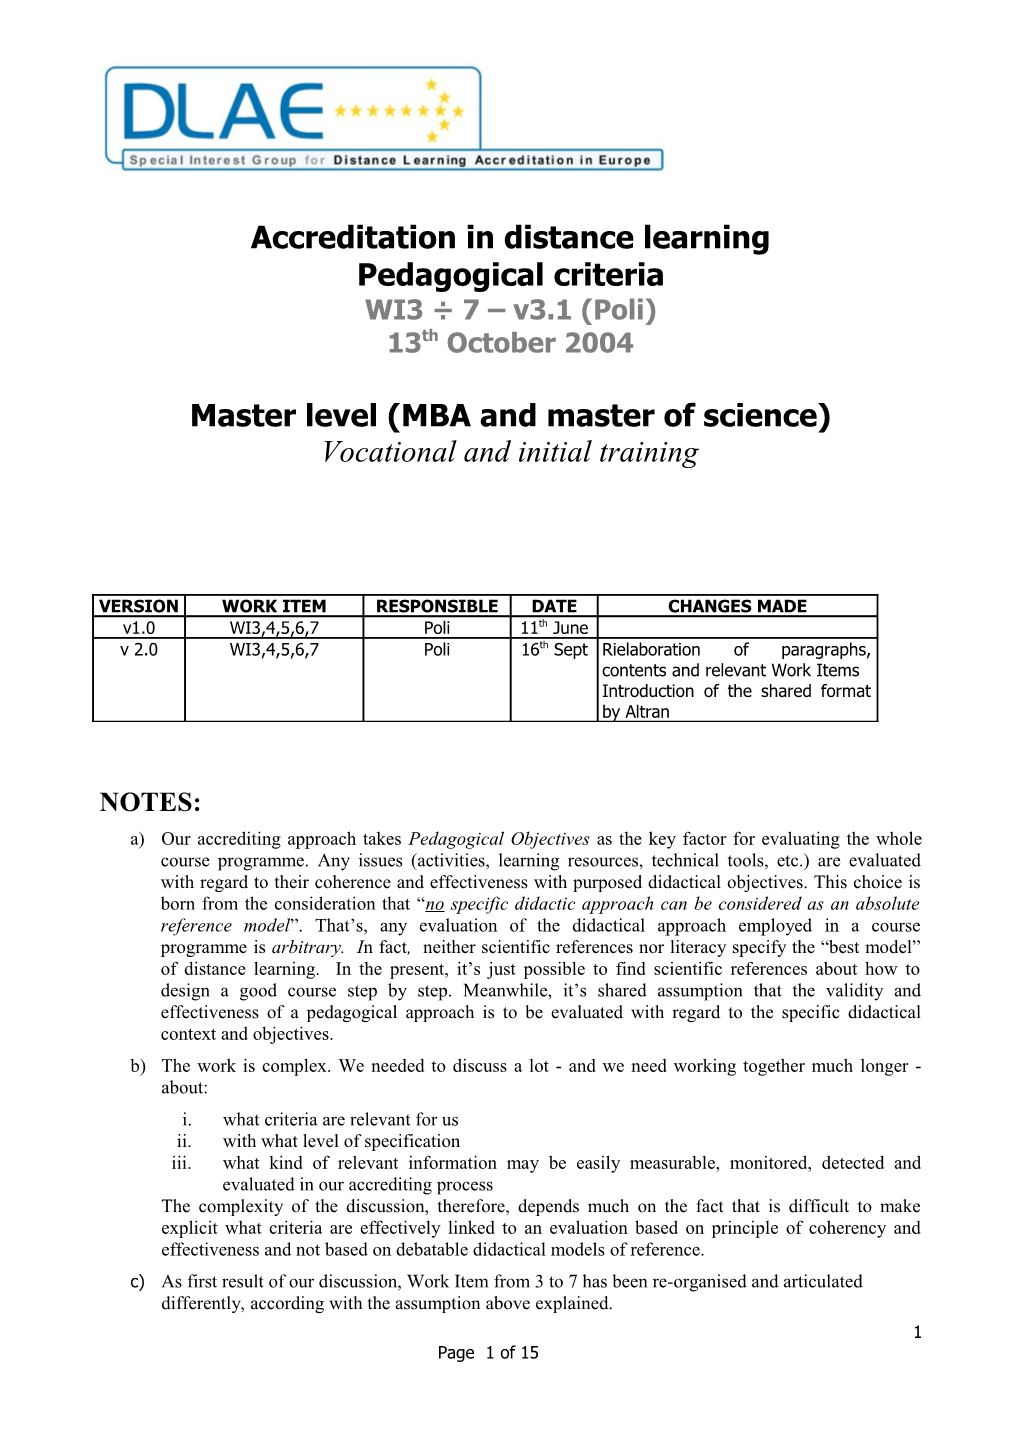 Accreditation in Distance Learning s2